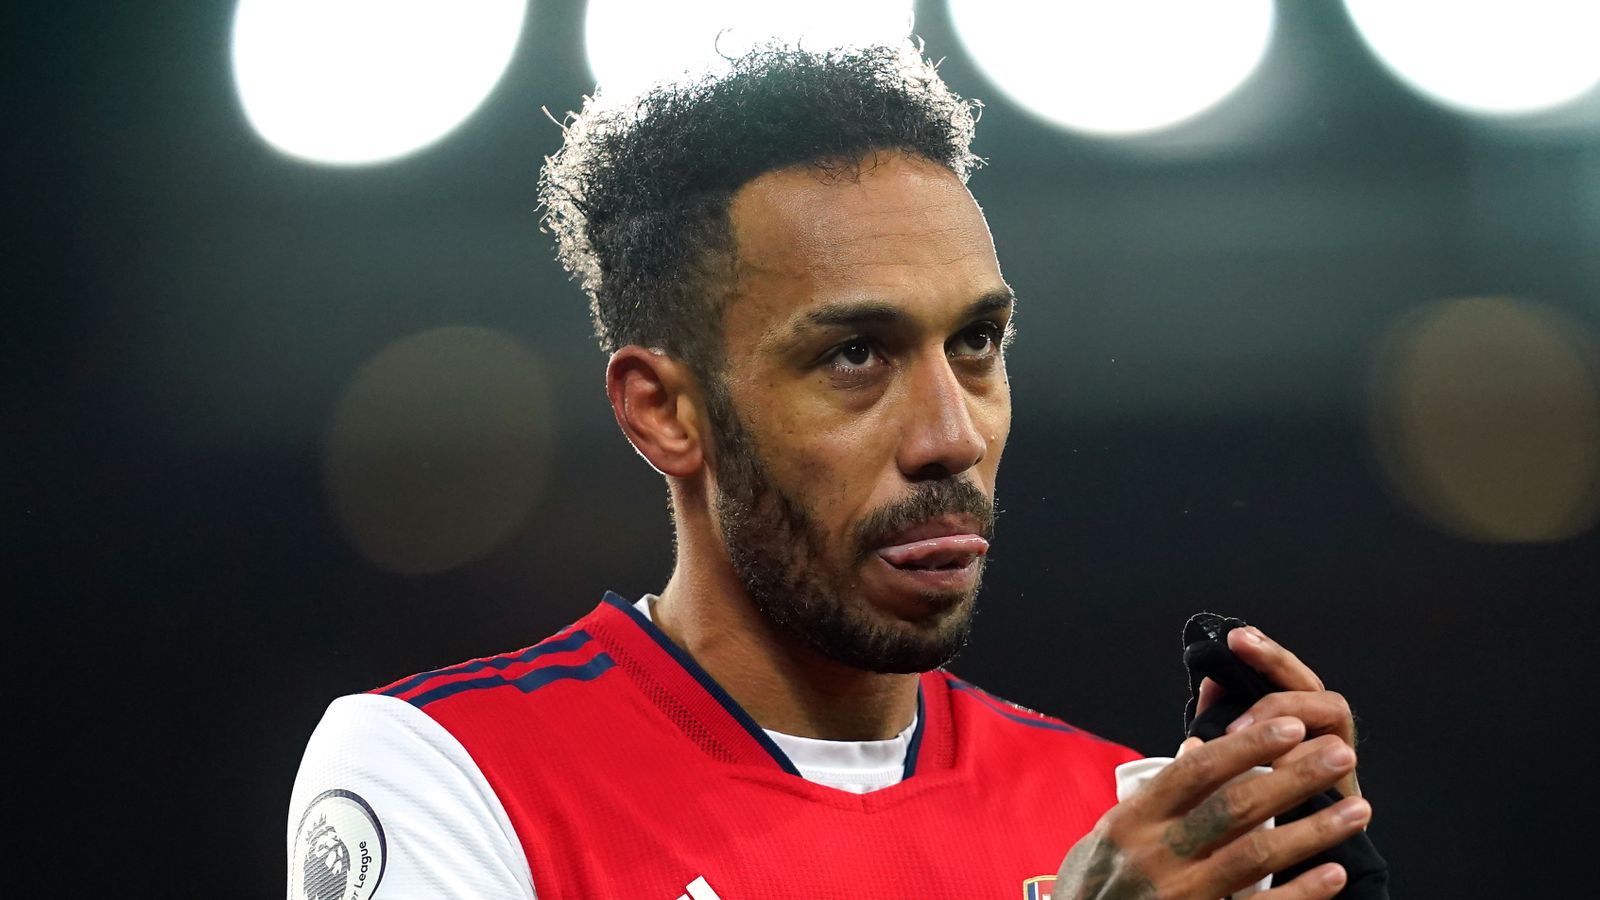 Pierre-Emerick Aubameyang: Arsenal to consider suitable offers for striker with a January transfer not ruled out